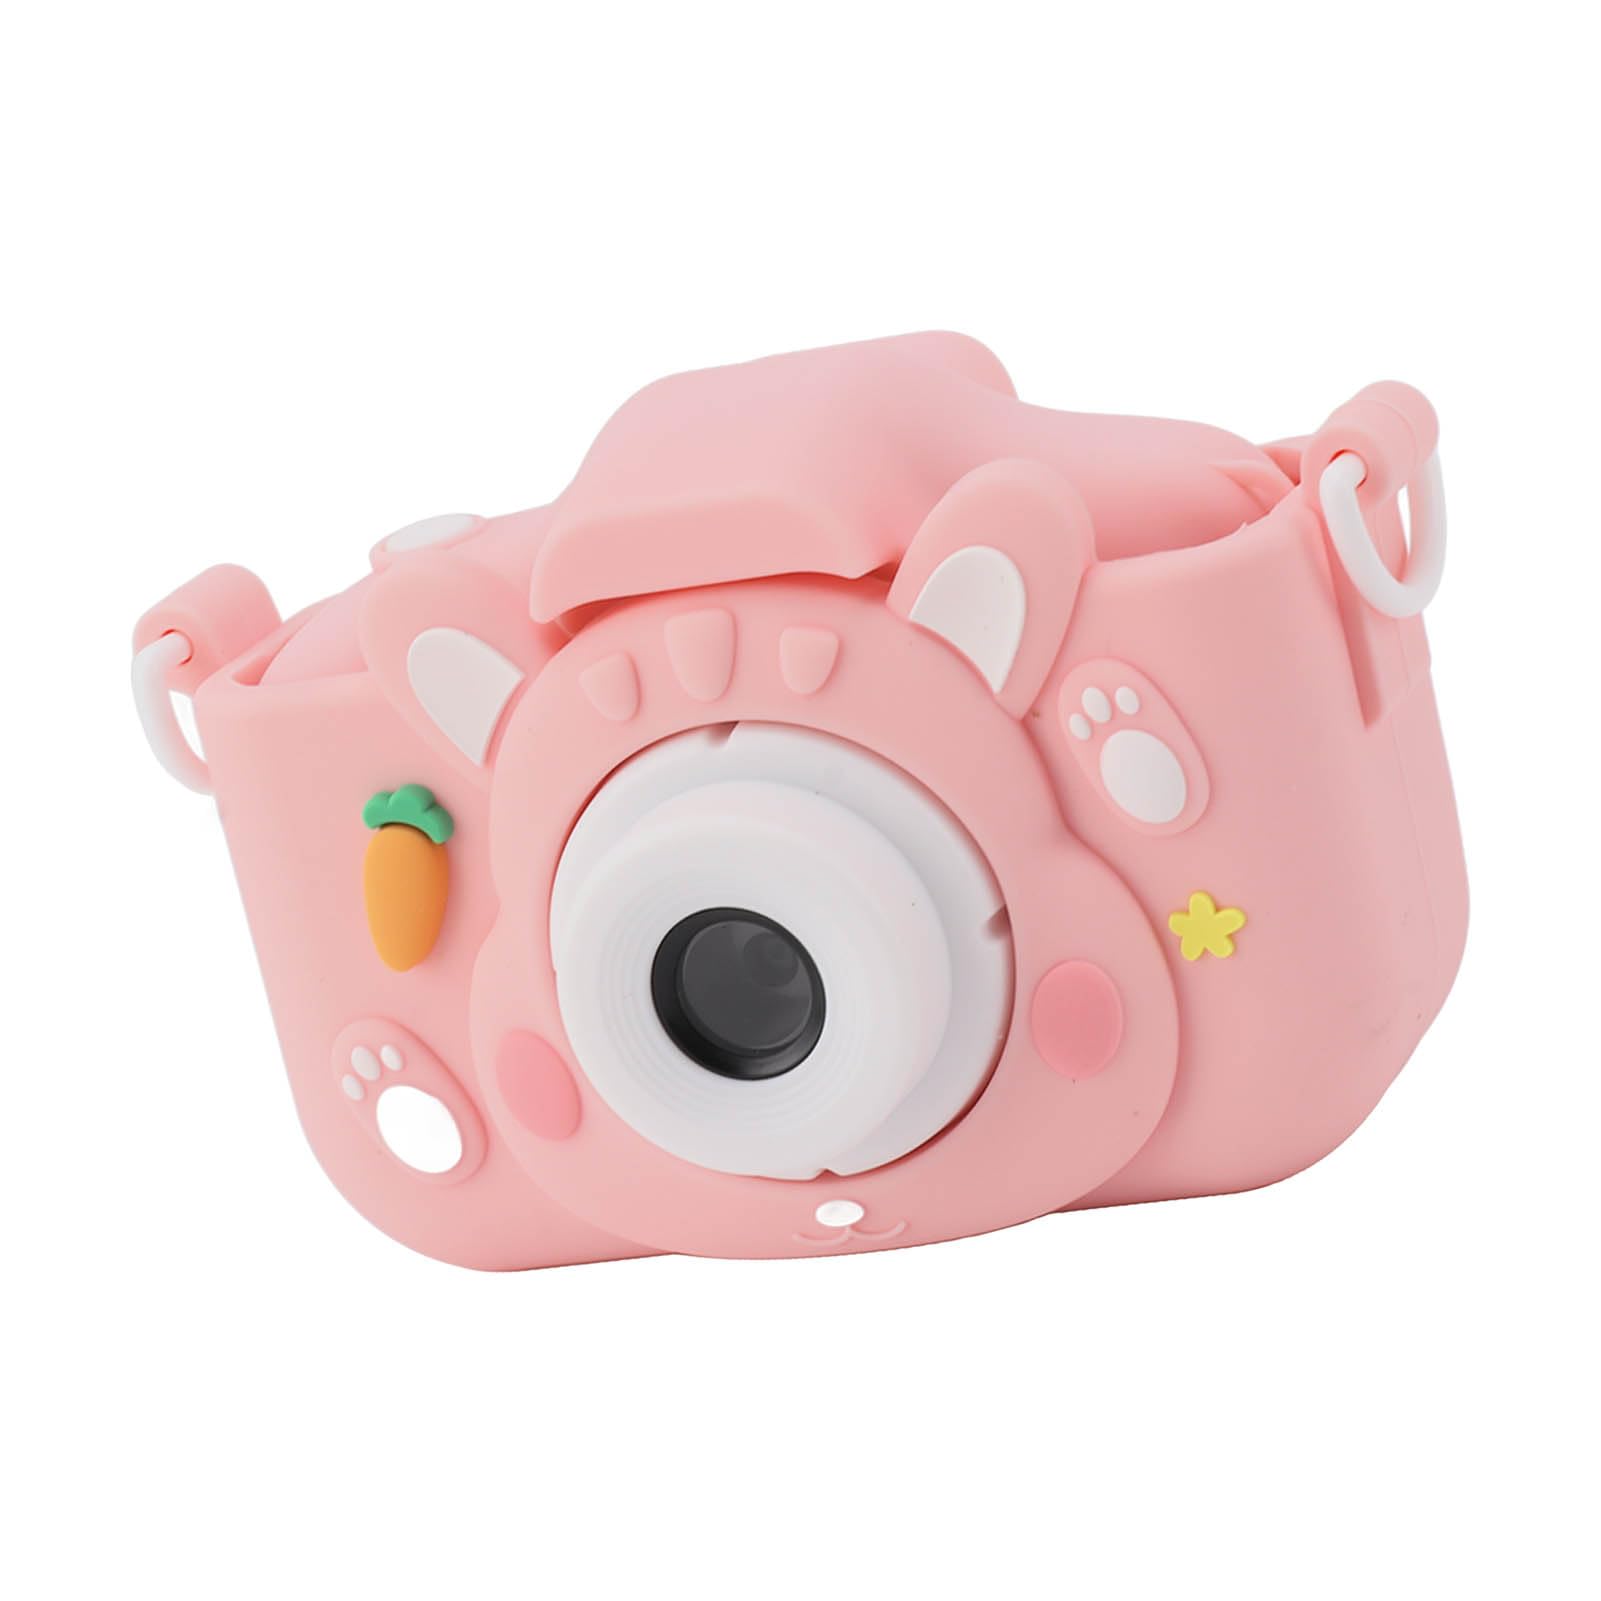 Selfie Camera Toy, Dual Lens 2.0in Screen Children Digital Camera with 32G Card for Boys Girls (Pink)